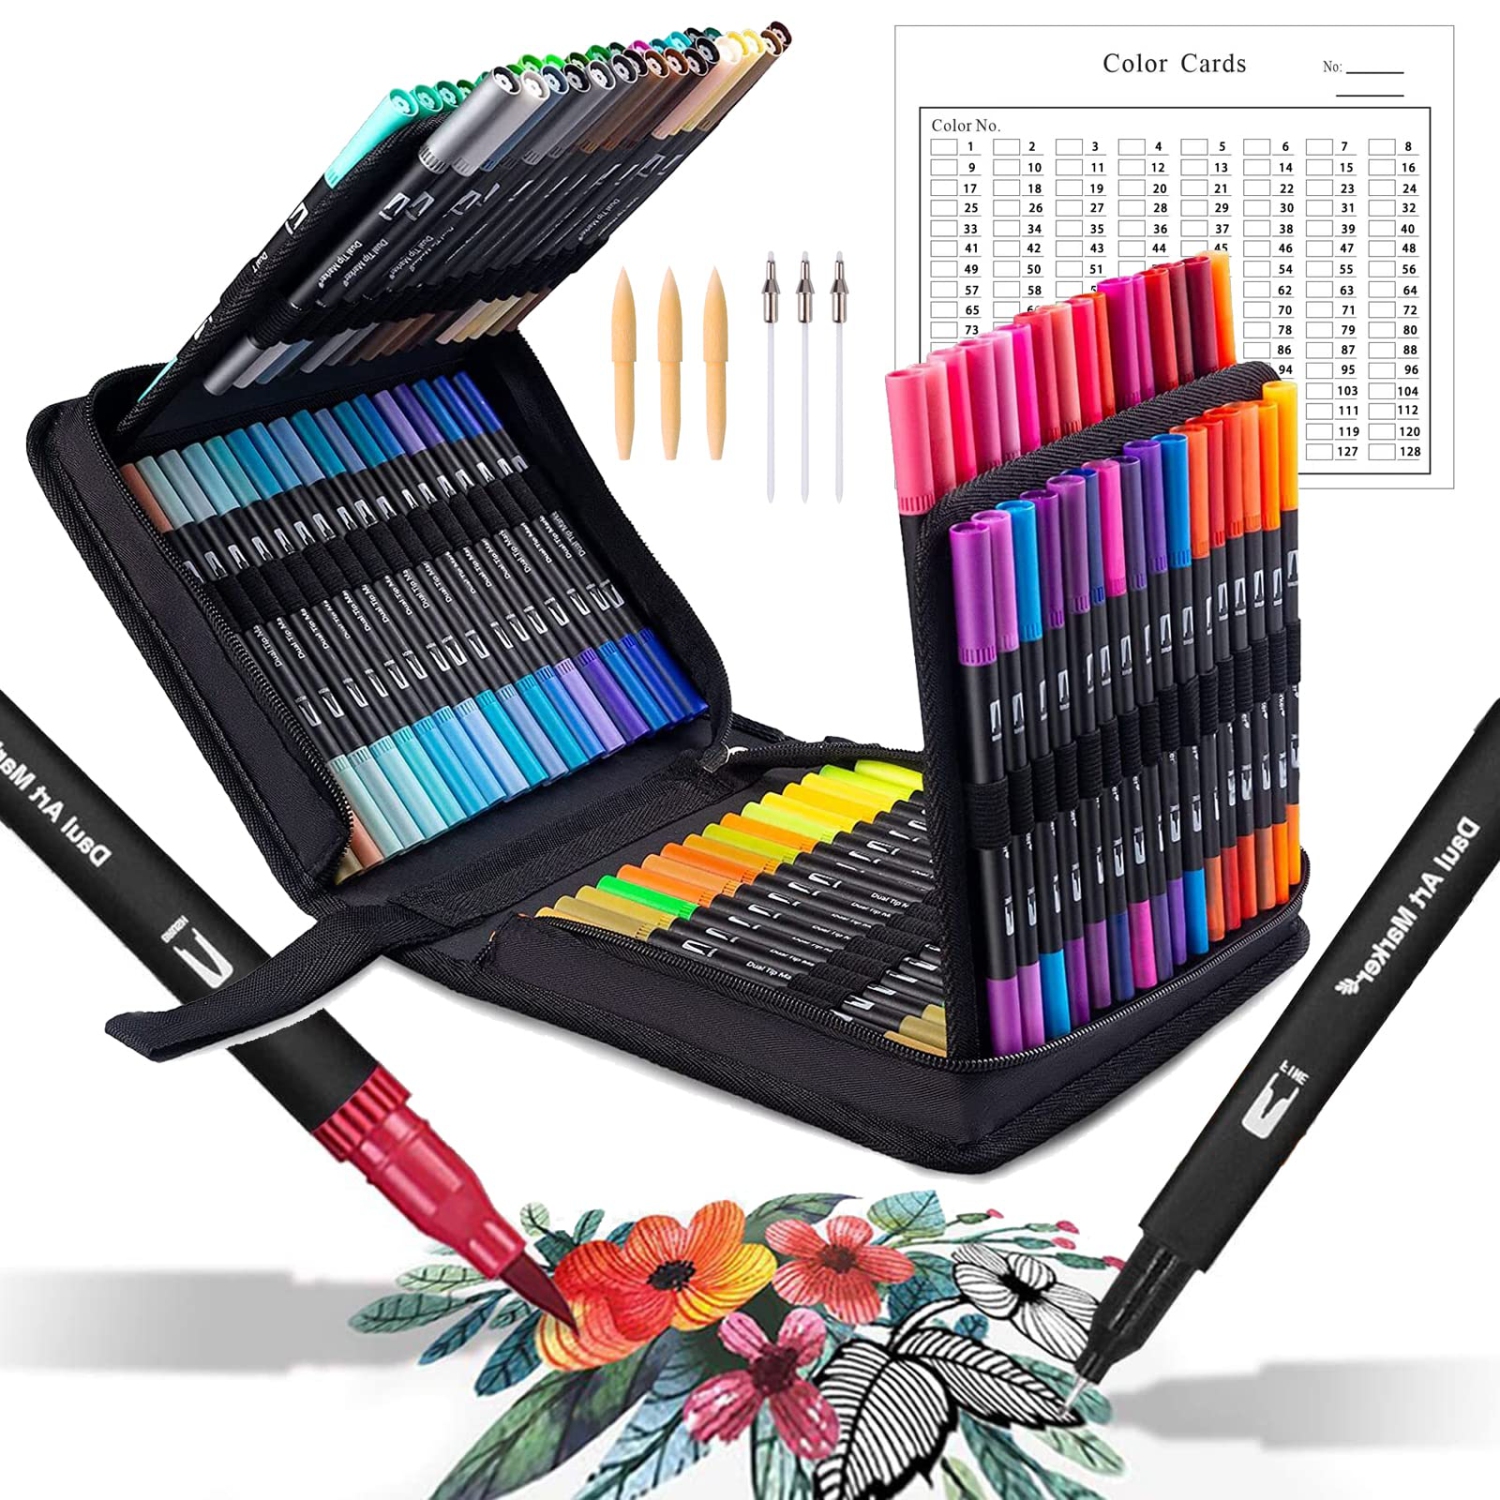 Rainbow Art Dual Tip Brush Pen Set - 120 Vibrant Colored Markers for Calligraphy, Coloring, Drawing - Watercolor Felt Tip Pens - Ideal for Adults, Kids, Students - Planner, Calenda